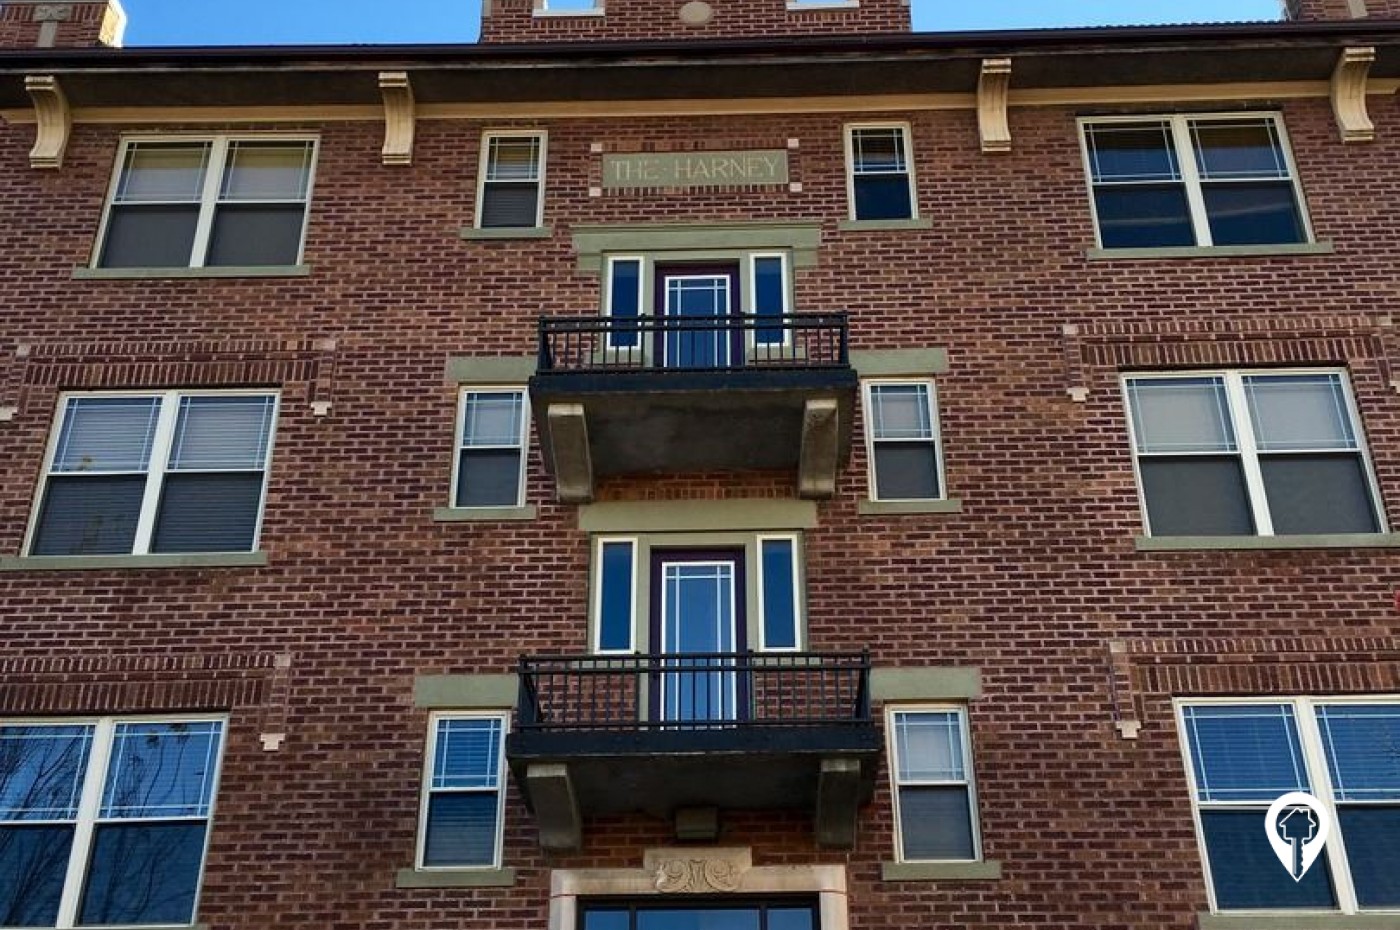 The Lofts Apartments on Harney